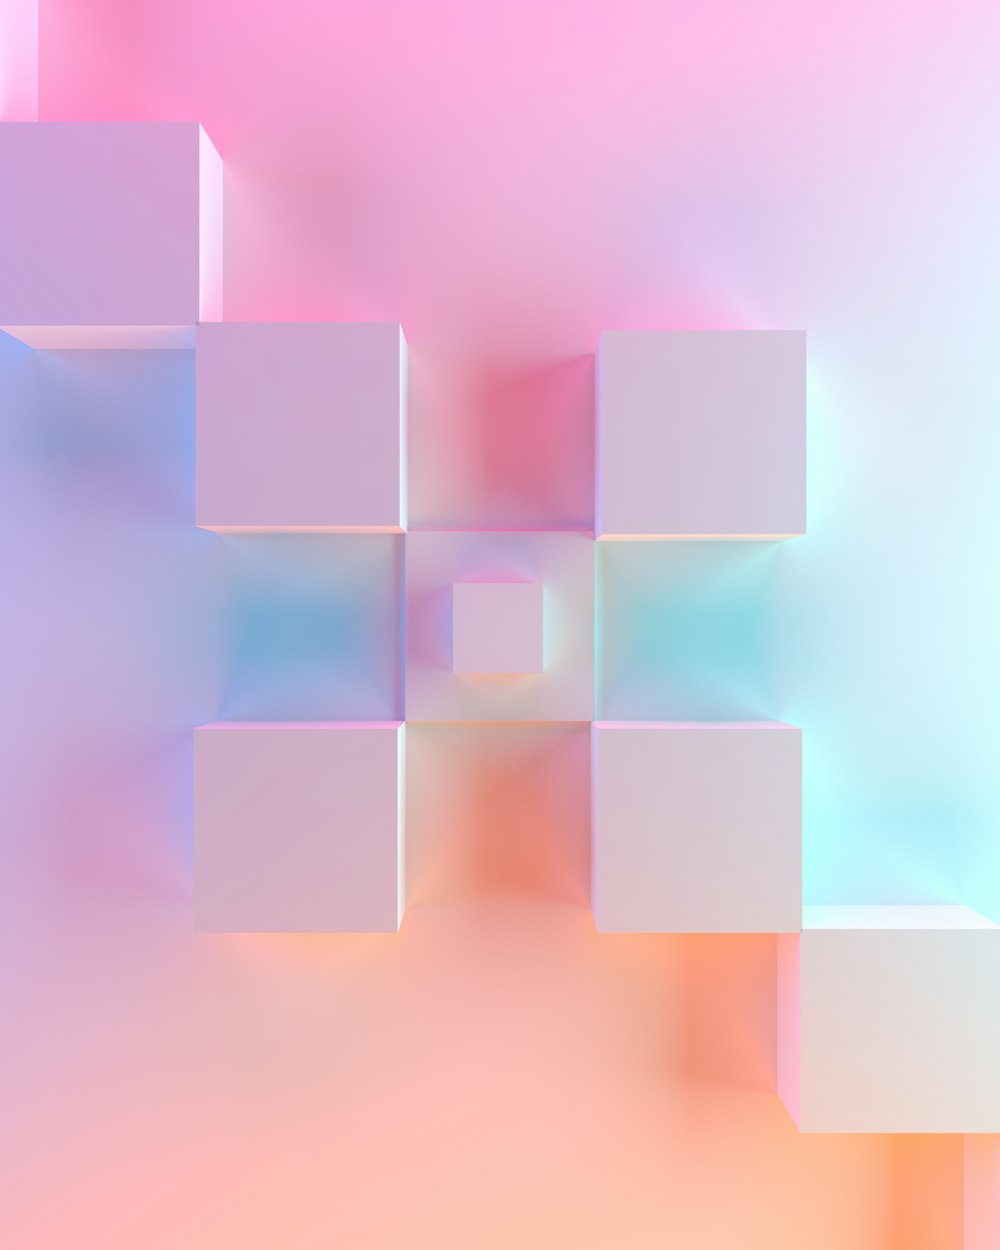 a blurry image of cubes on a pink and blue background